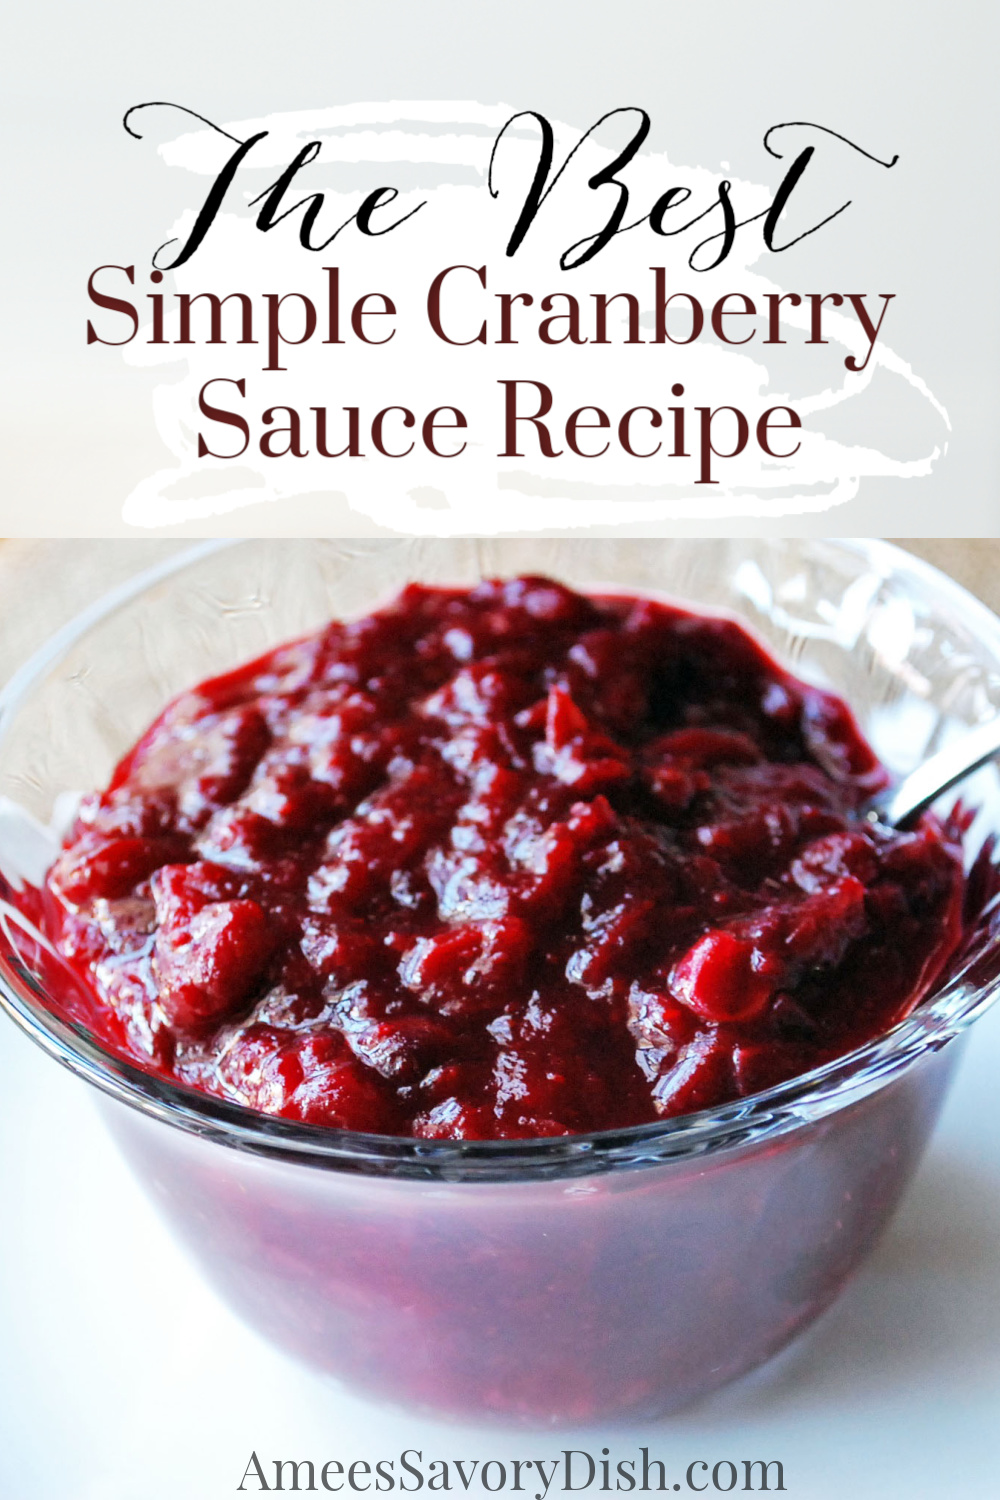 This homemade cranberry sauce is delicious and easy to prepare, made with fresh-squeezed orange juice, zest, coconut sugar, and fresh whole cranberries. No refined sugar! via @Ameessavorydish